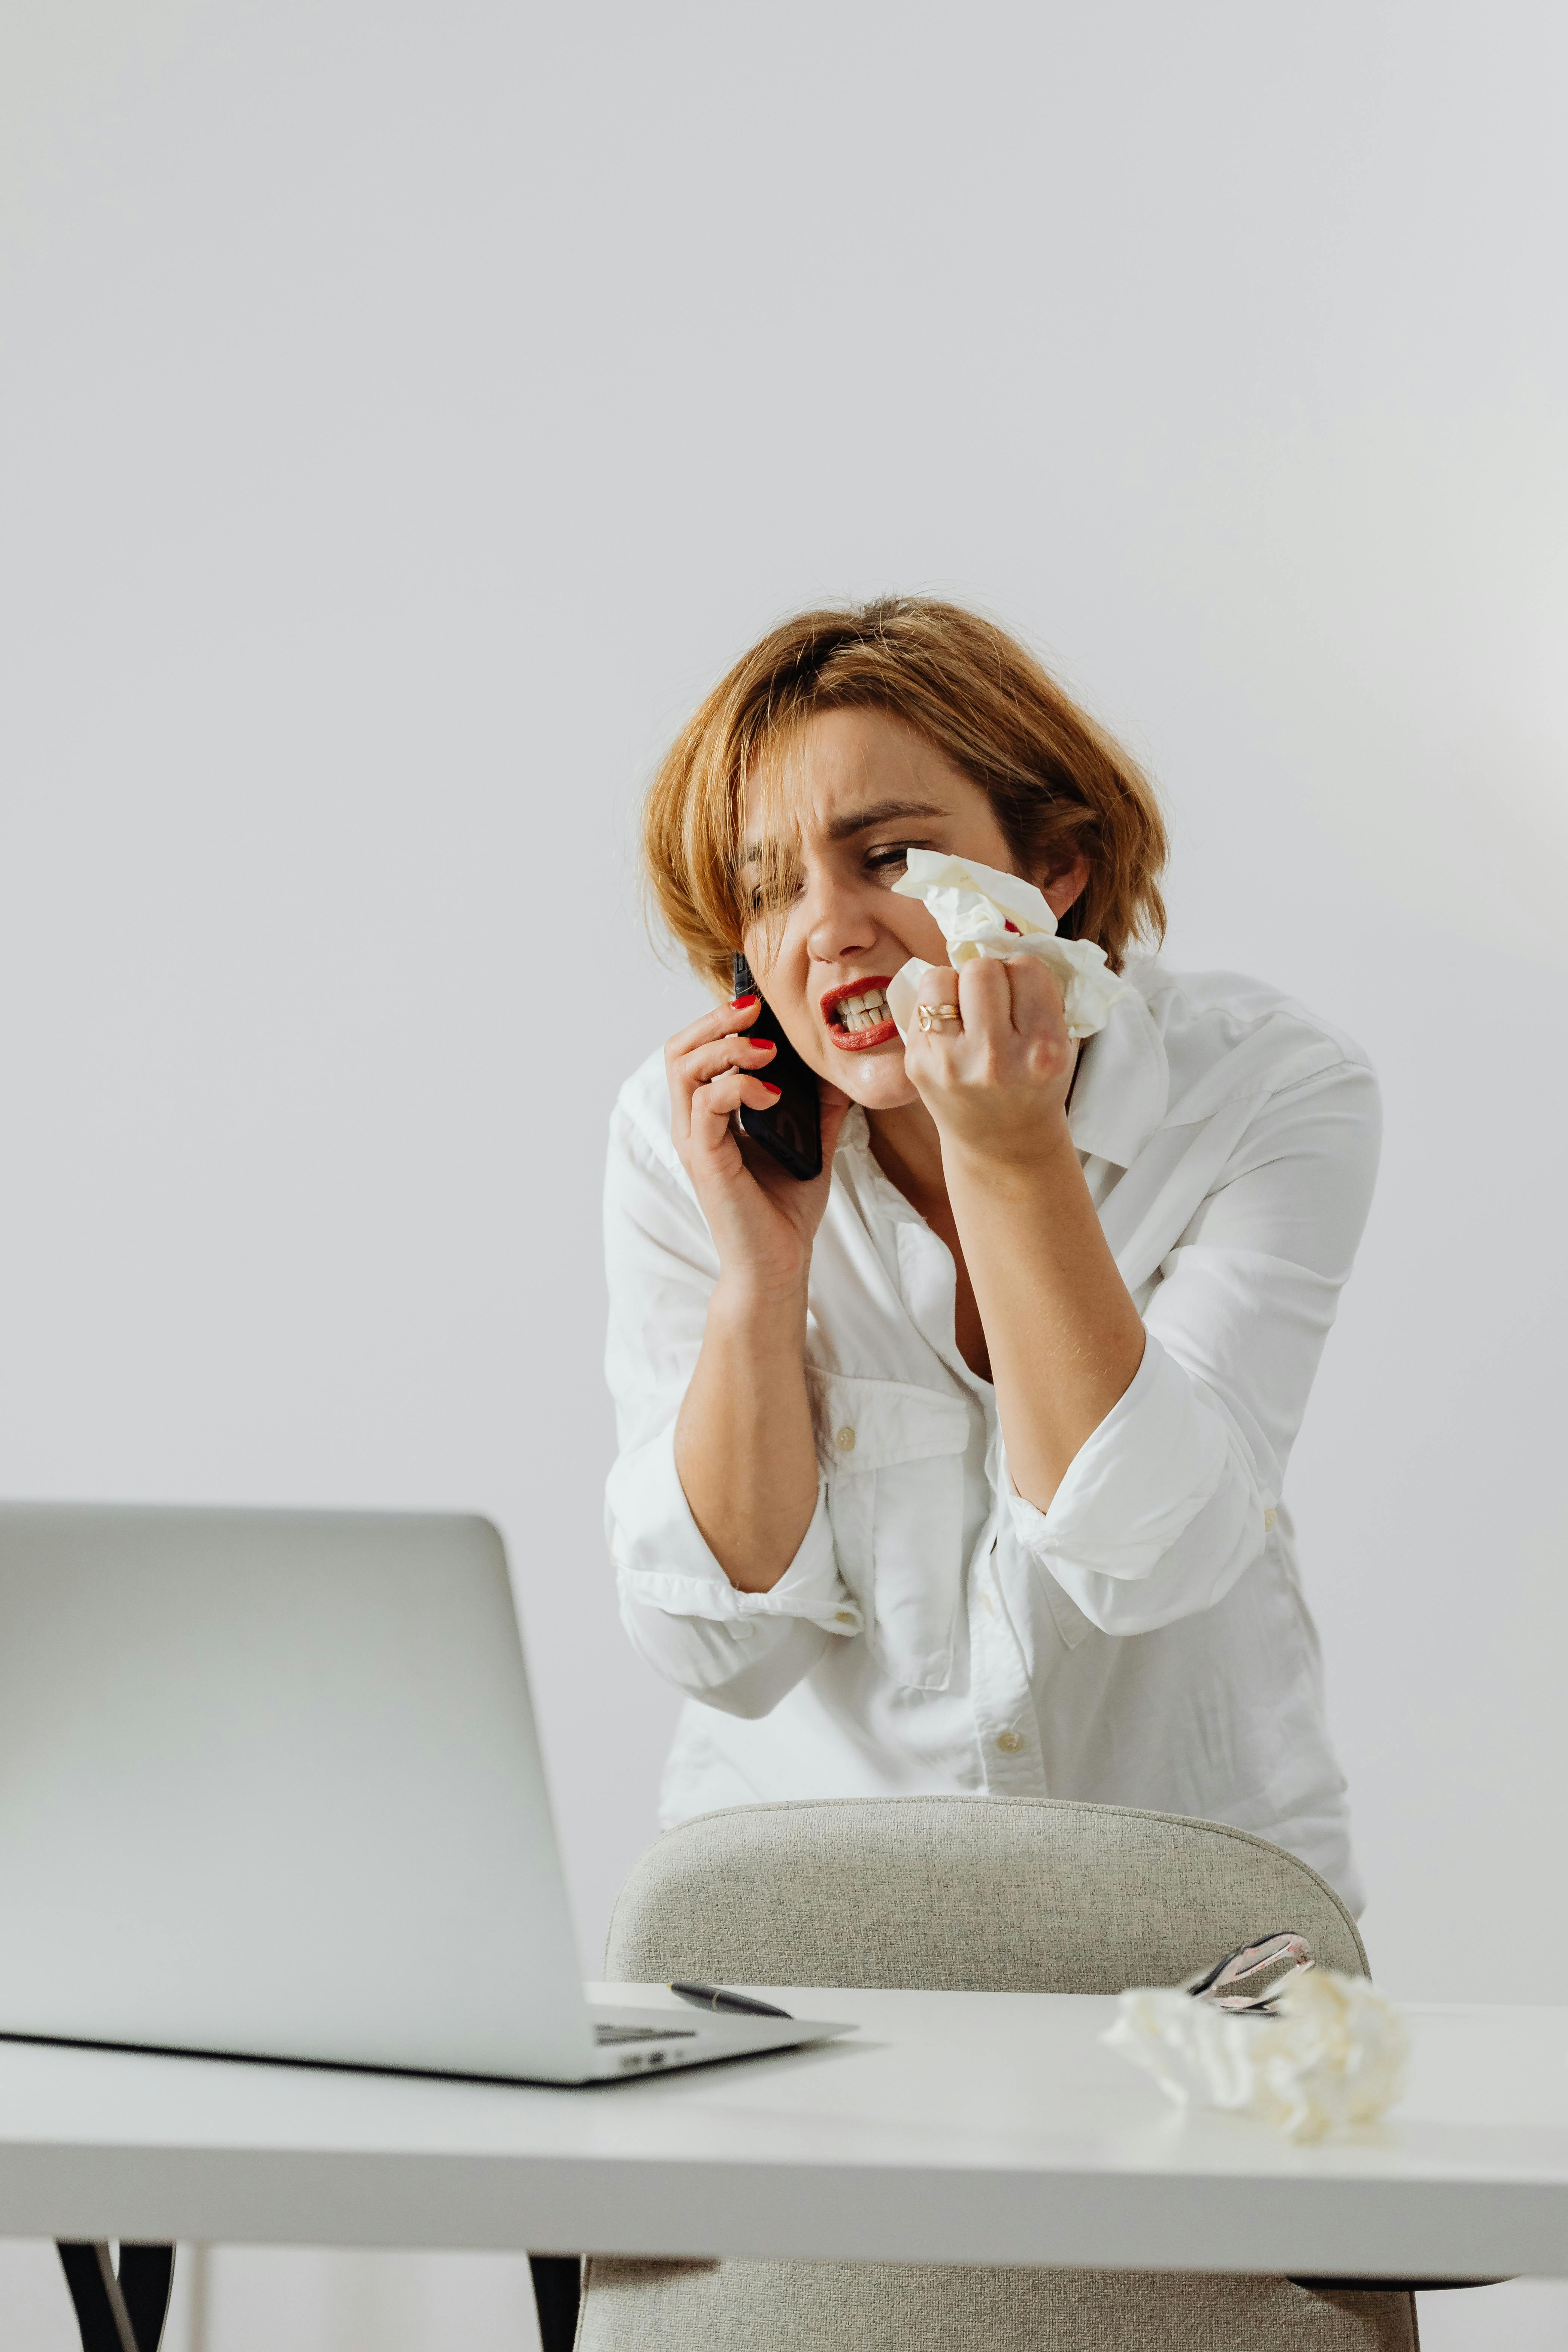 An upset woman crumpling a tissue while on the phone | Source: Pexels